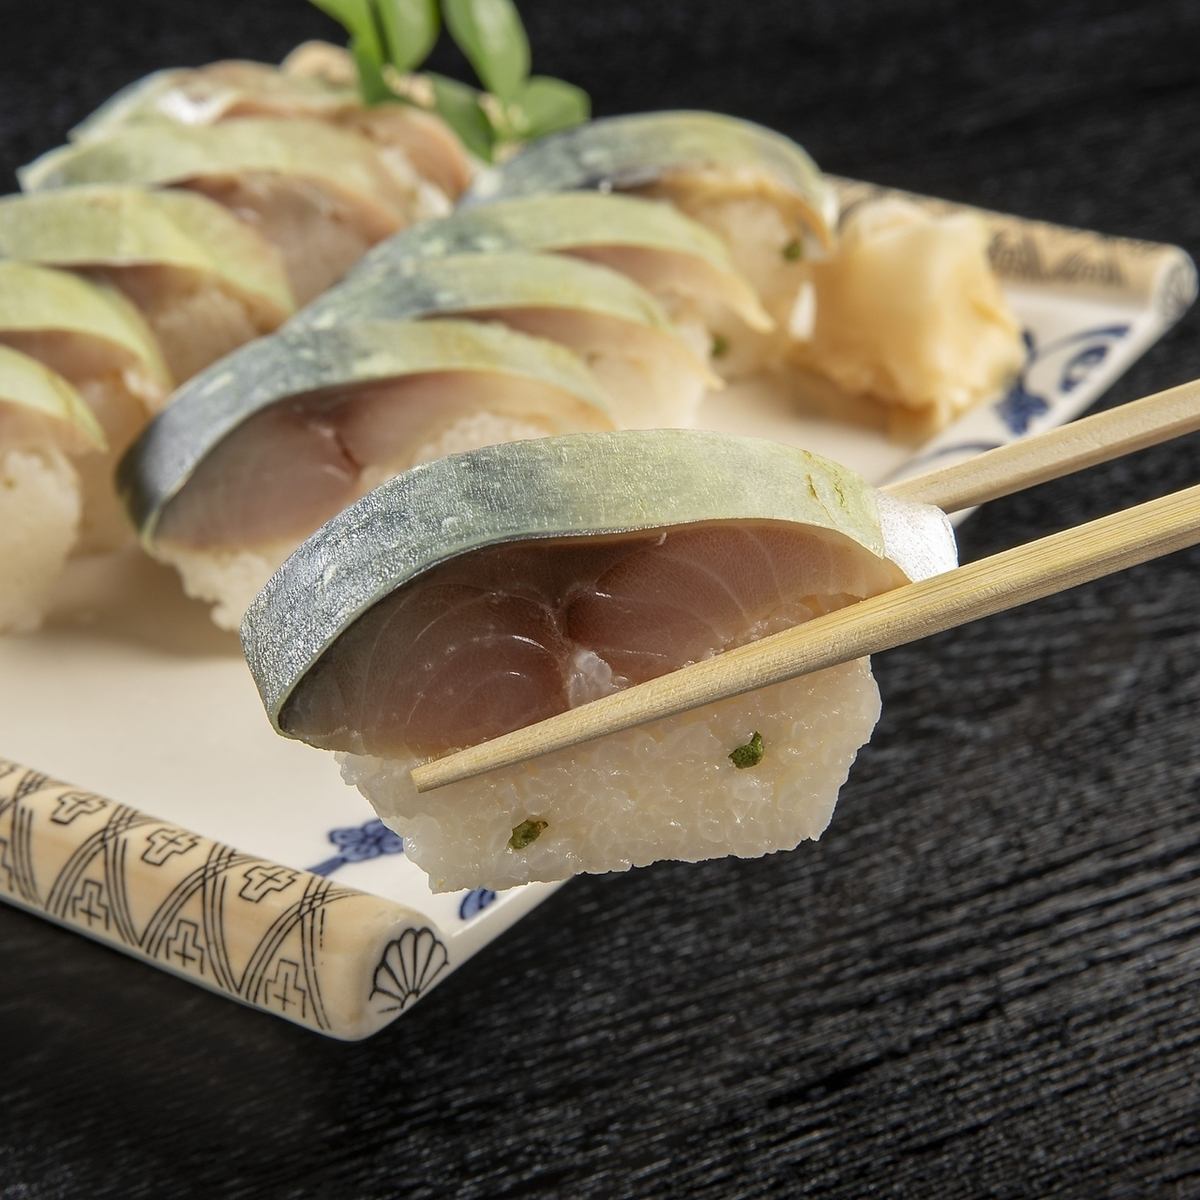 Founded 112 years ago.Be sure to try Sushikei's mackerel sushi, a flavor that has been loved for many years and has a long history!